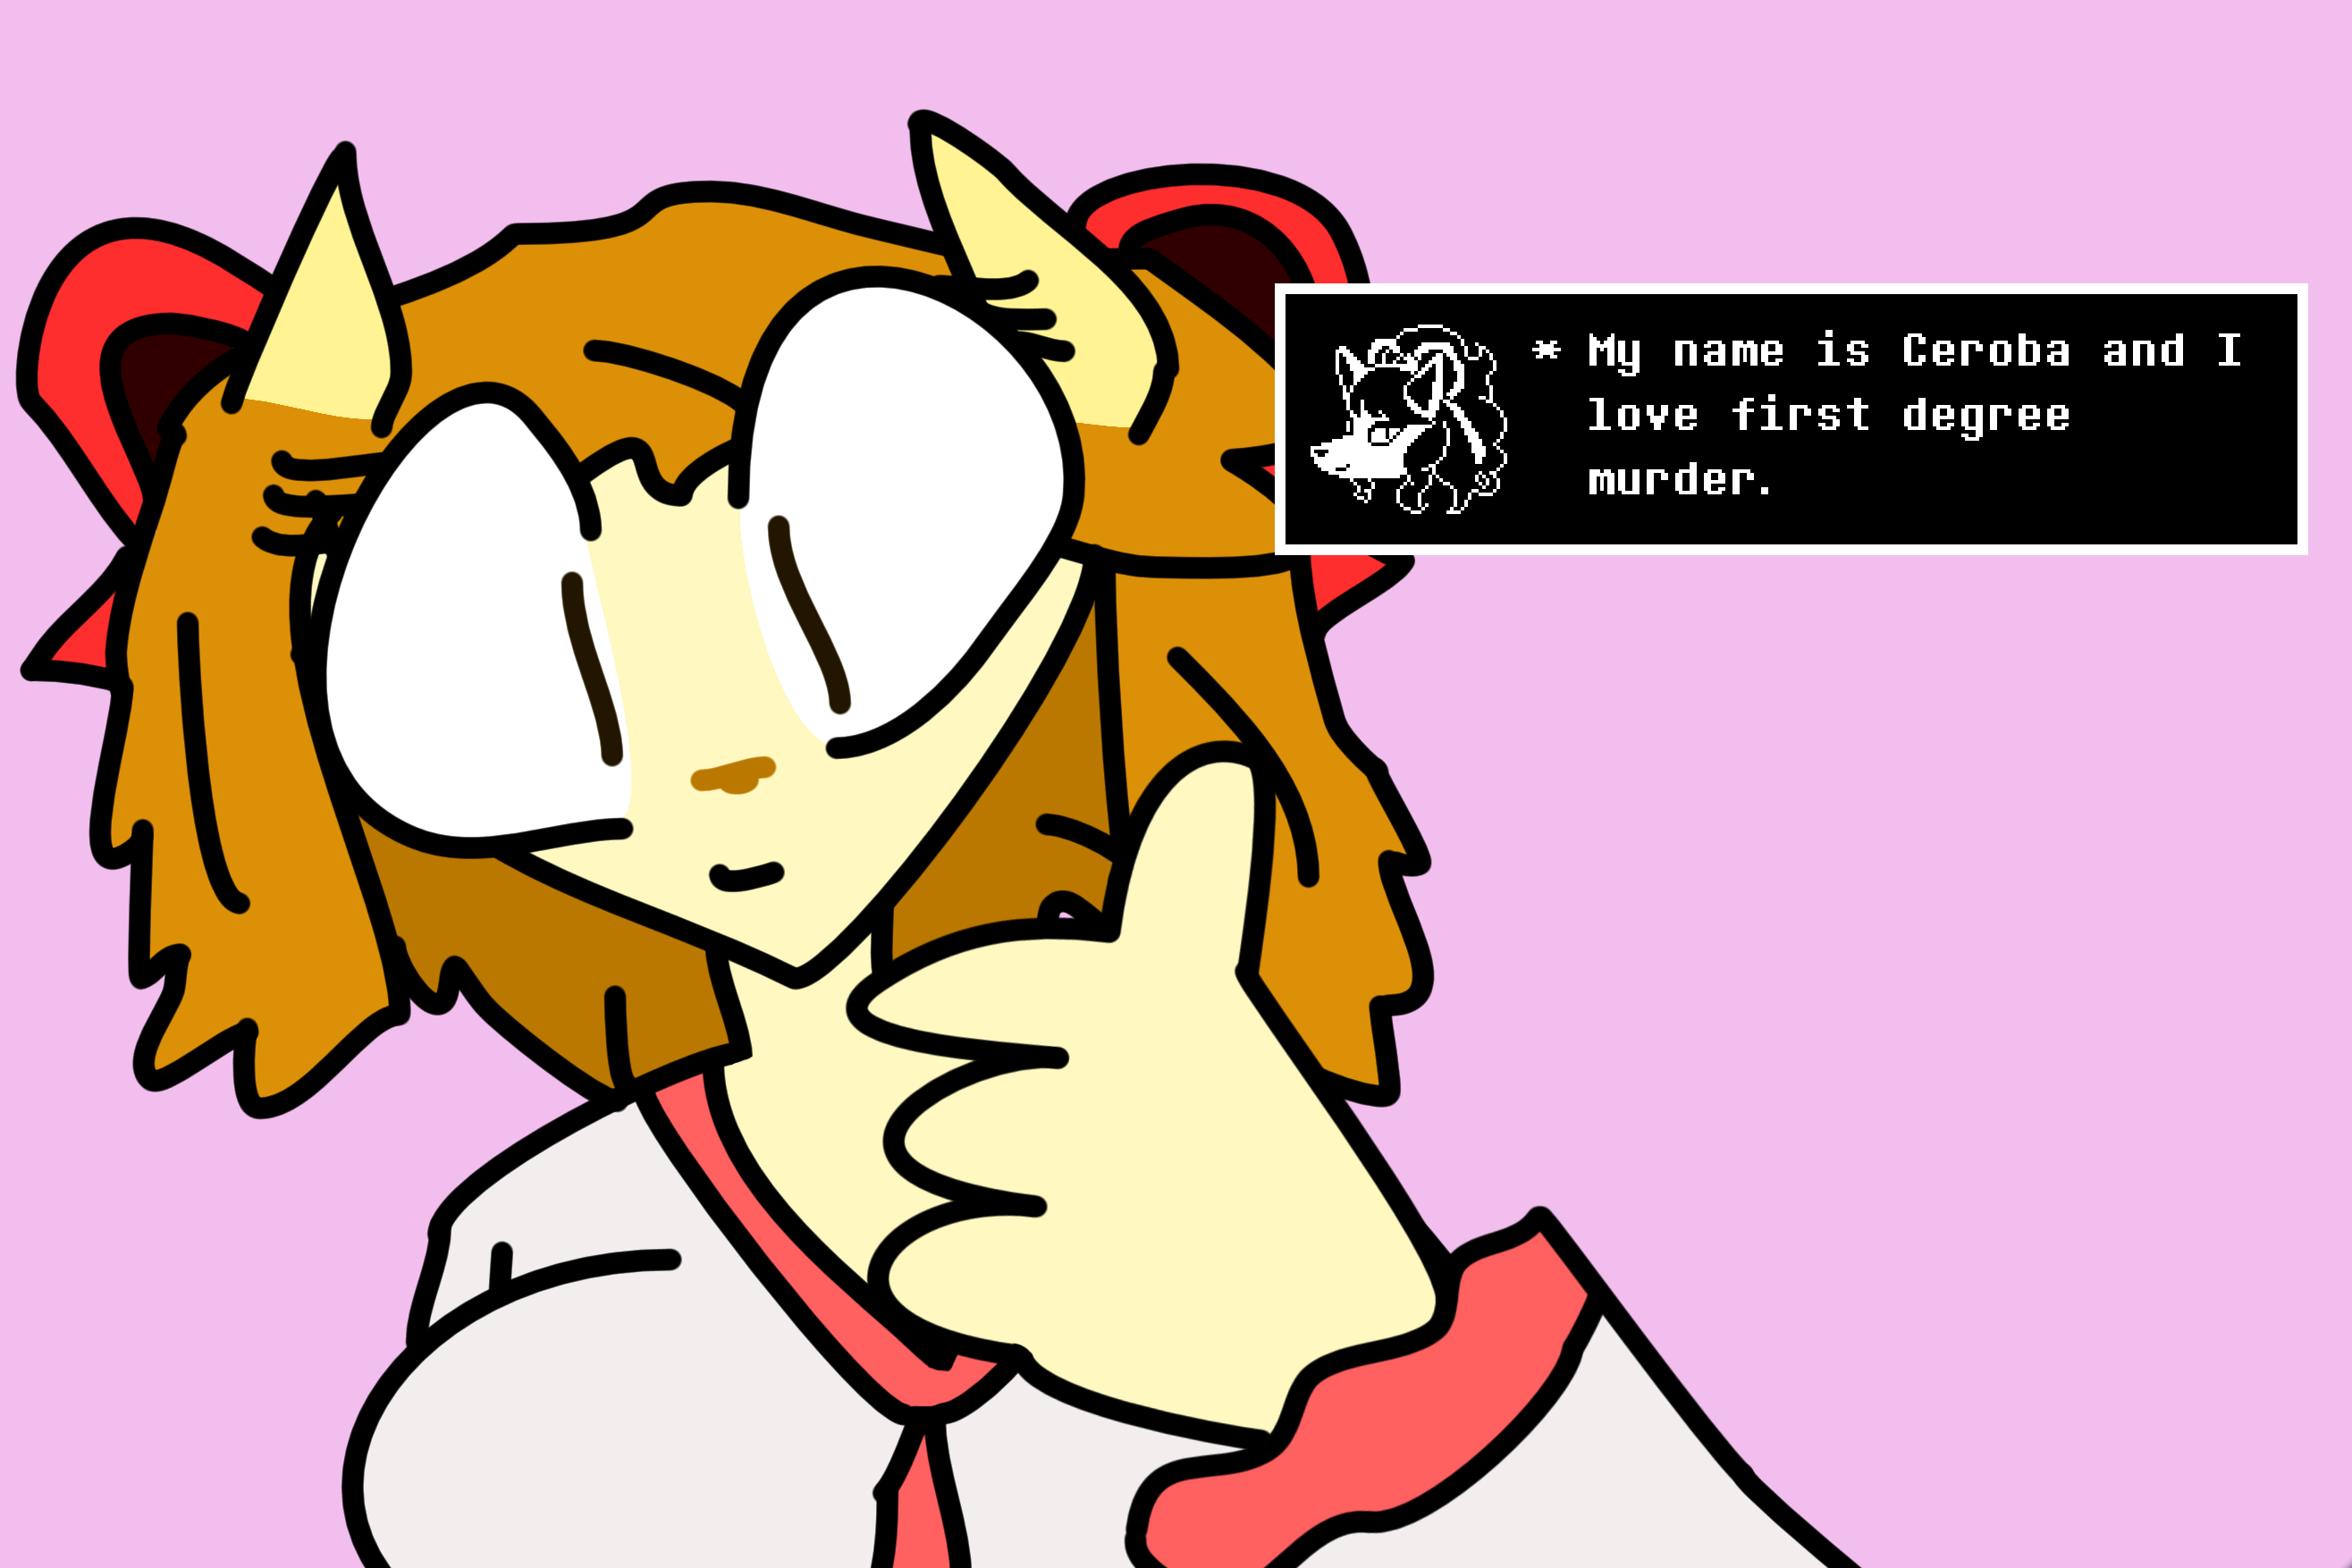 A digital drawing of Ceroba from UNDERTALE Yellow, smiling and giving a thumbs up. The background is light pink, and there is a custom text box with her face, captioned 'My name is Ceroba and I love first degree murder.'